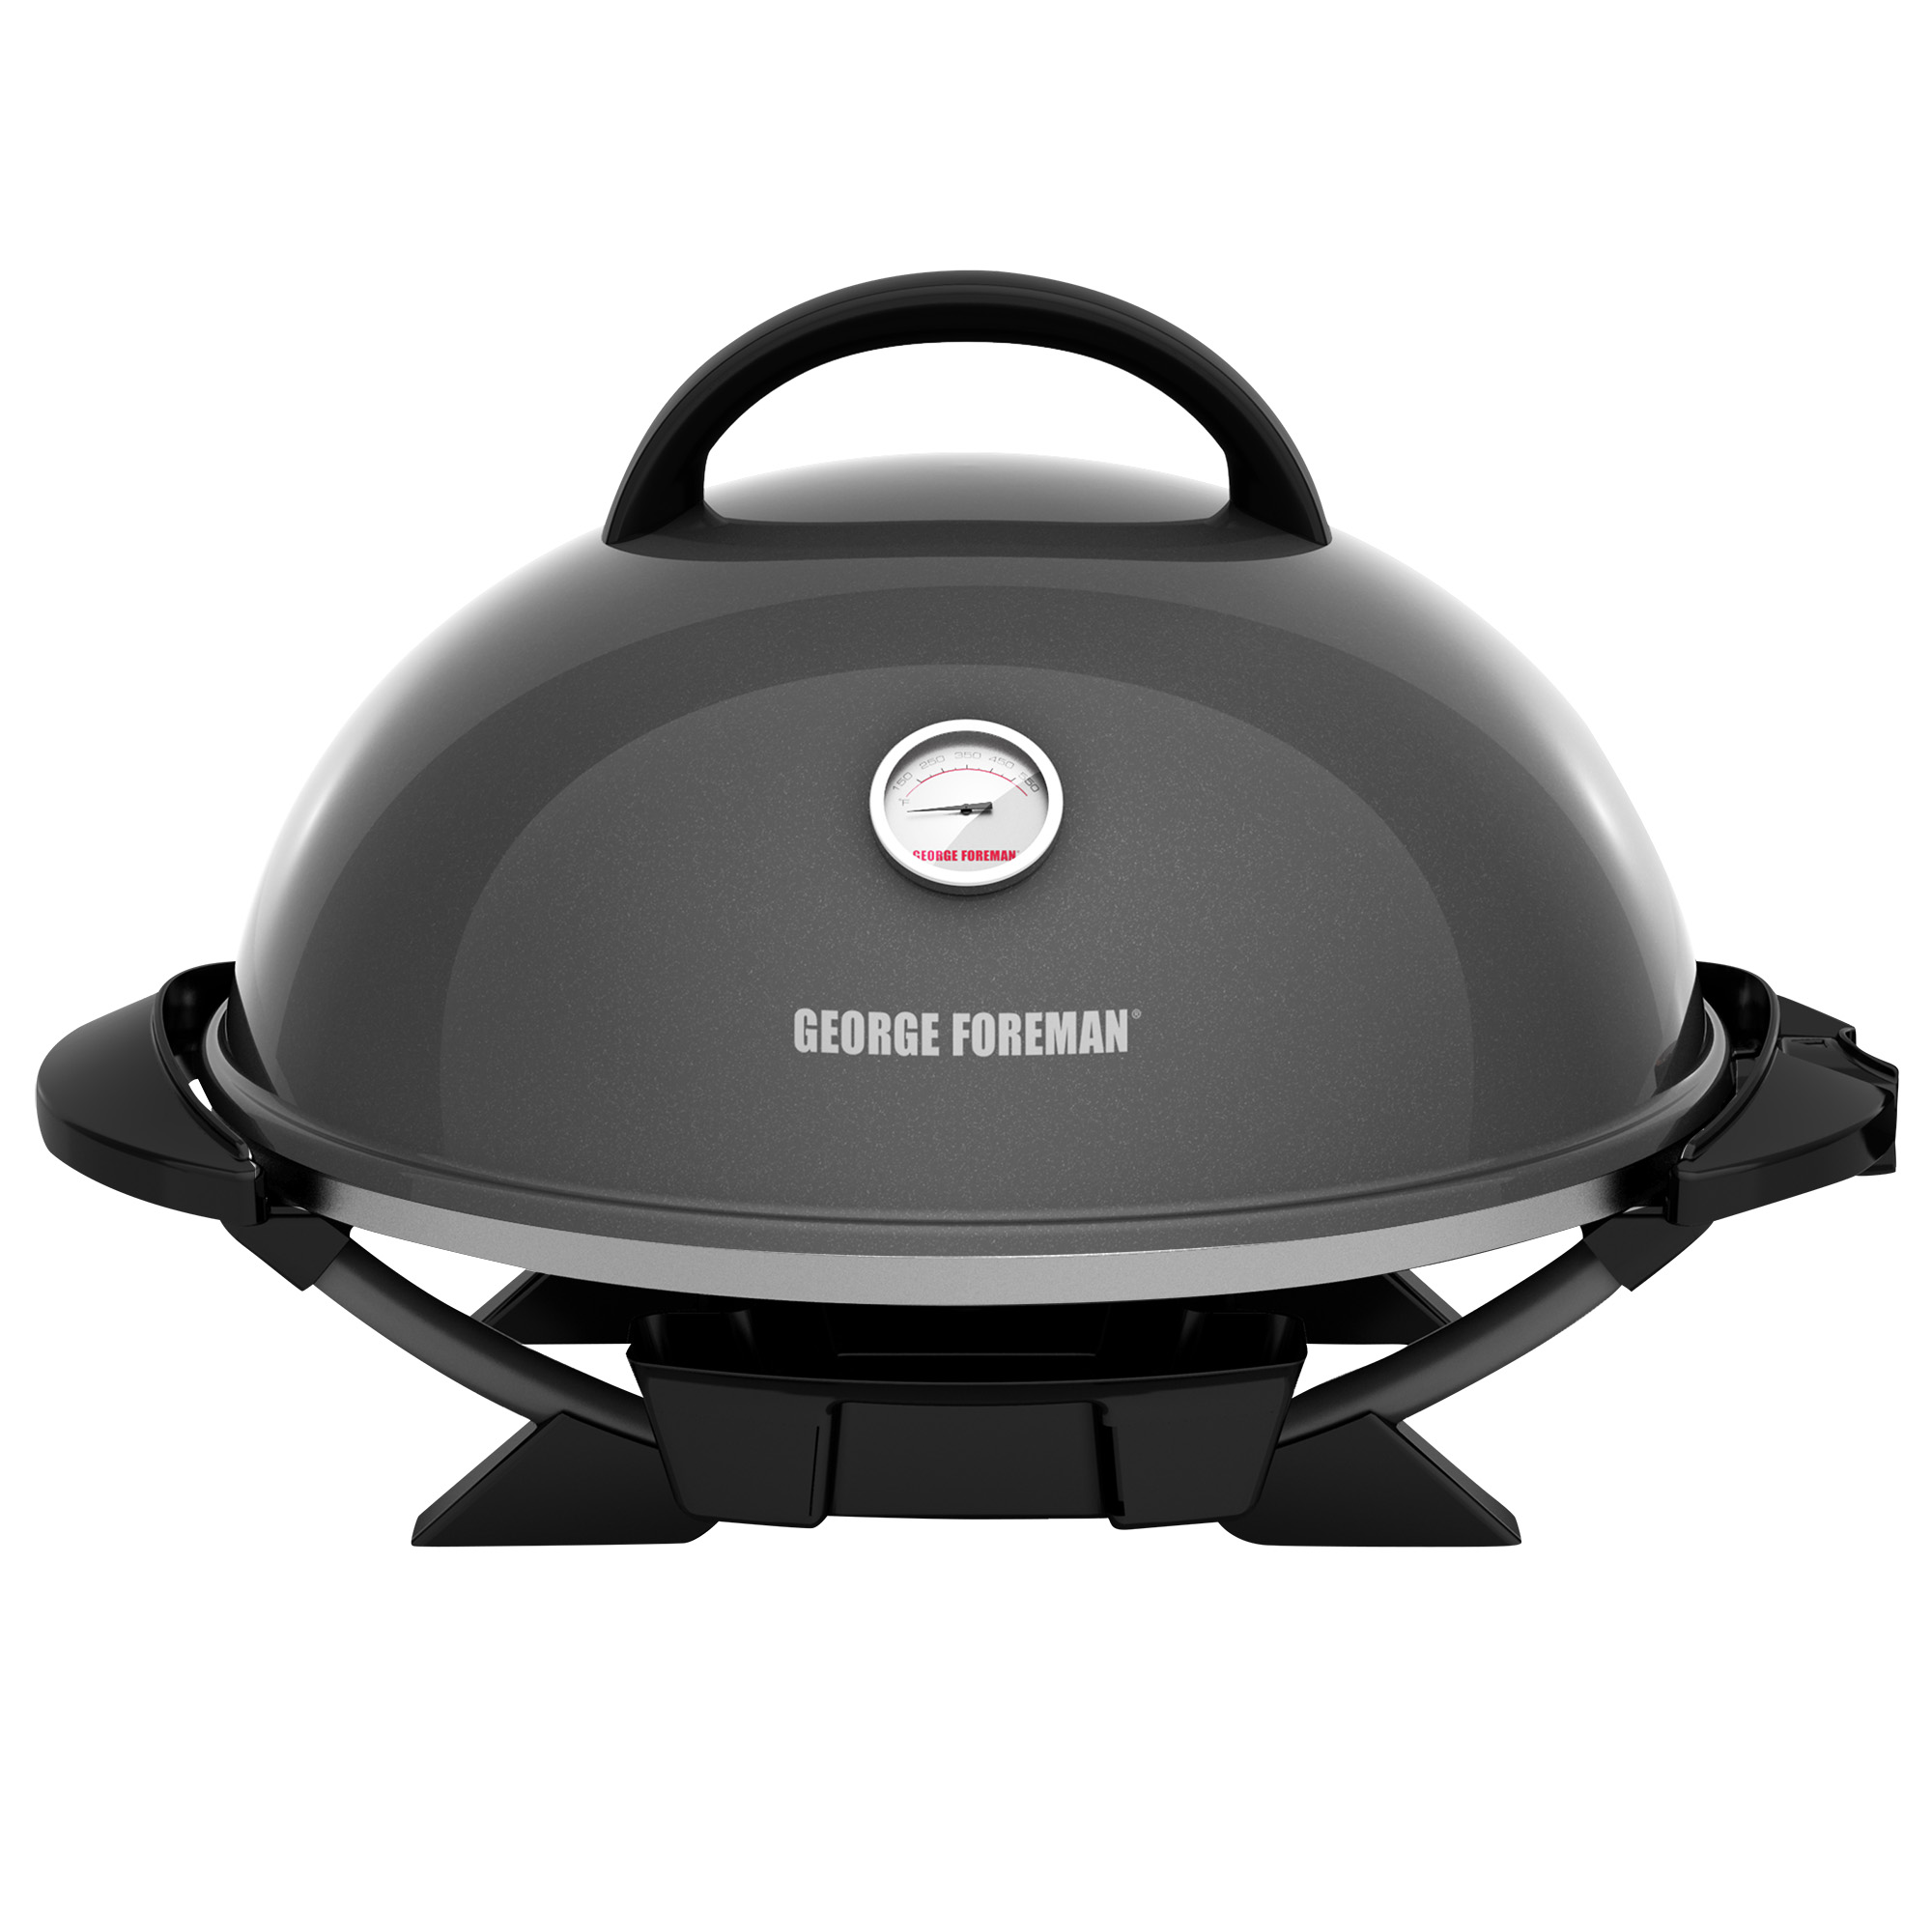 George Foreman 15+ Serving Indoor / Outdoor Electric Grill with Ceramic Plates, Gun Metal, GFO3320GM - image 1 of 8